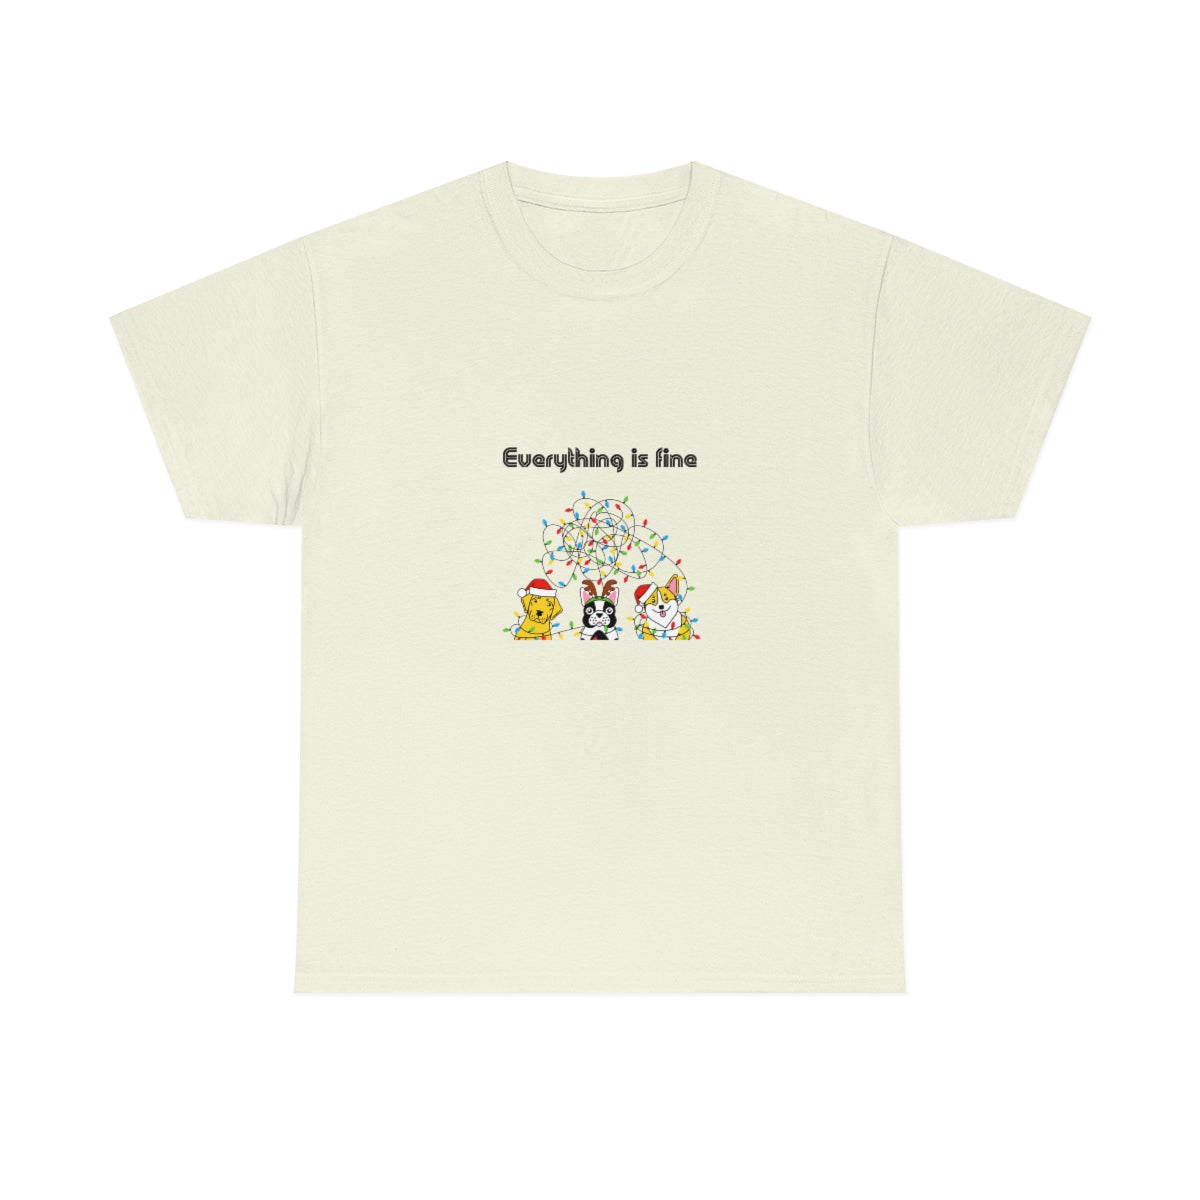 Everything is Fine Tshirt, I'm Fine Everything is Fine, Christmas Shirt, Funny Christmas Shirt, Sarcastic Tshirt, Funny Tshirt, Gift for Her - The Good Life Vibe